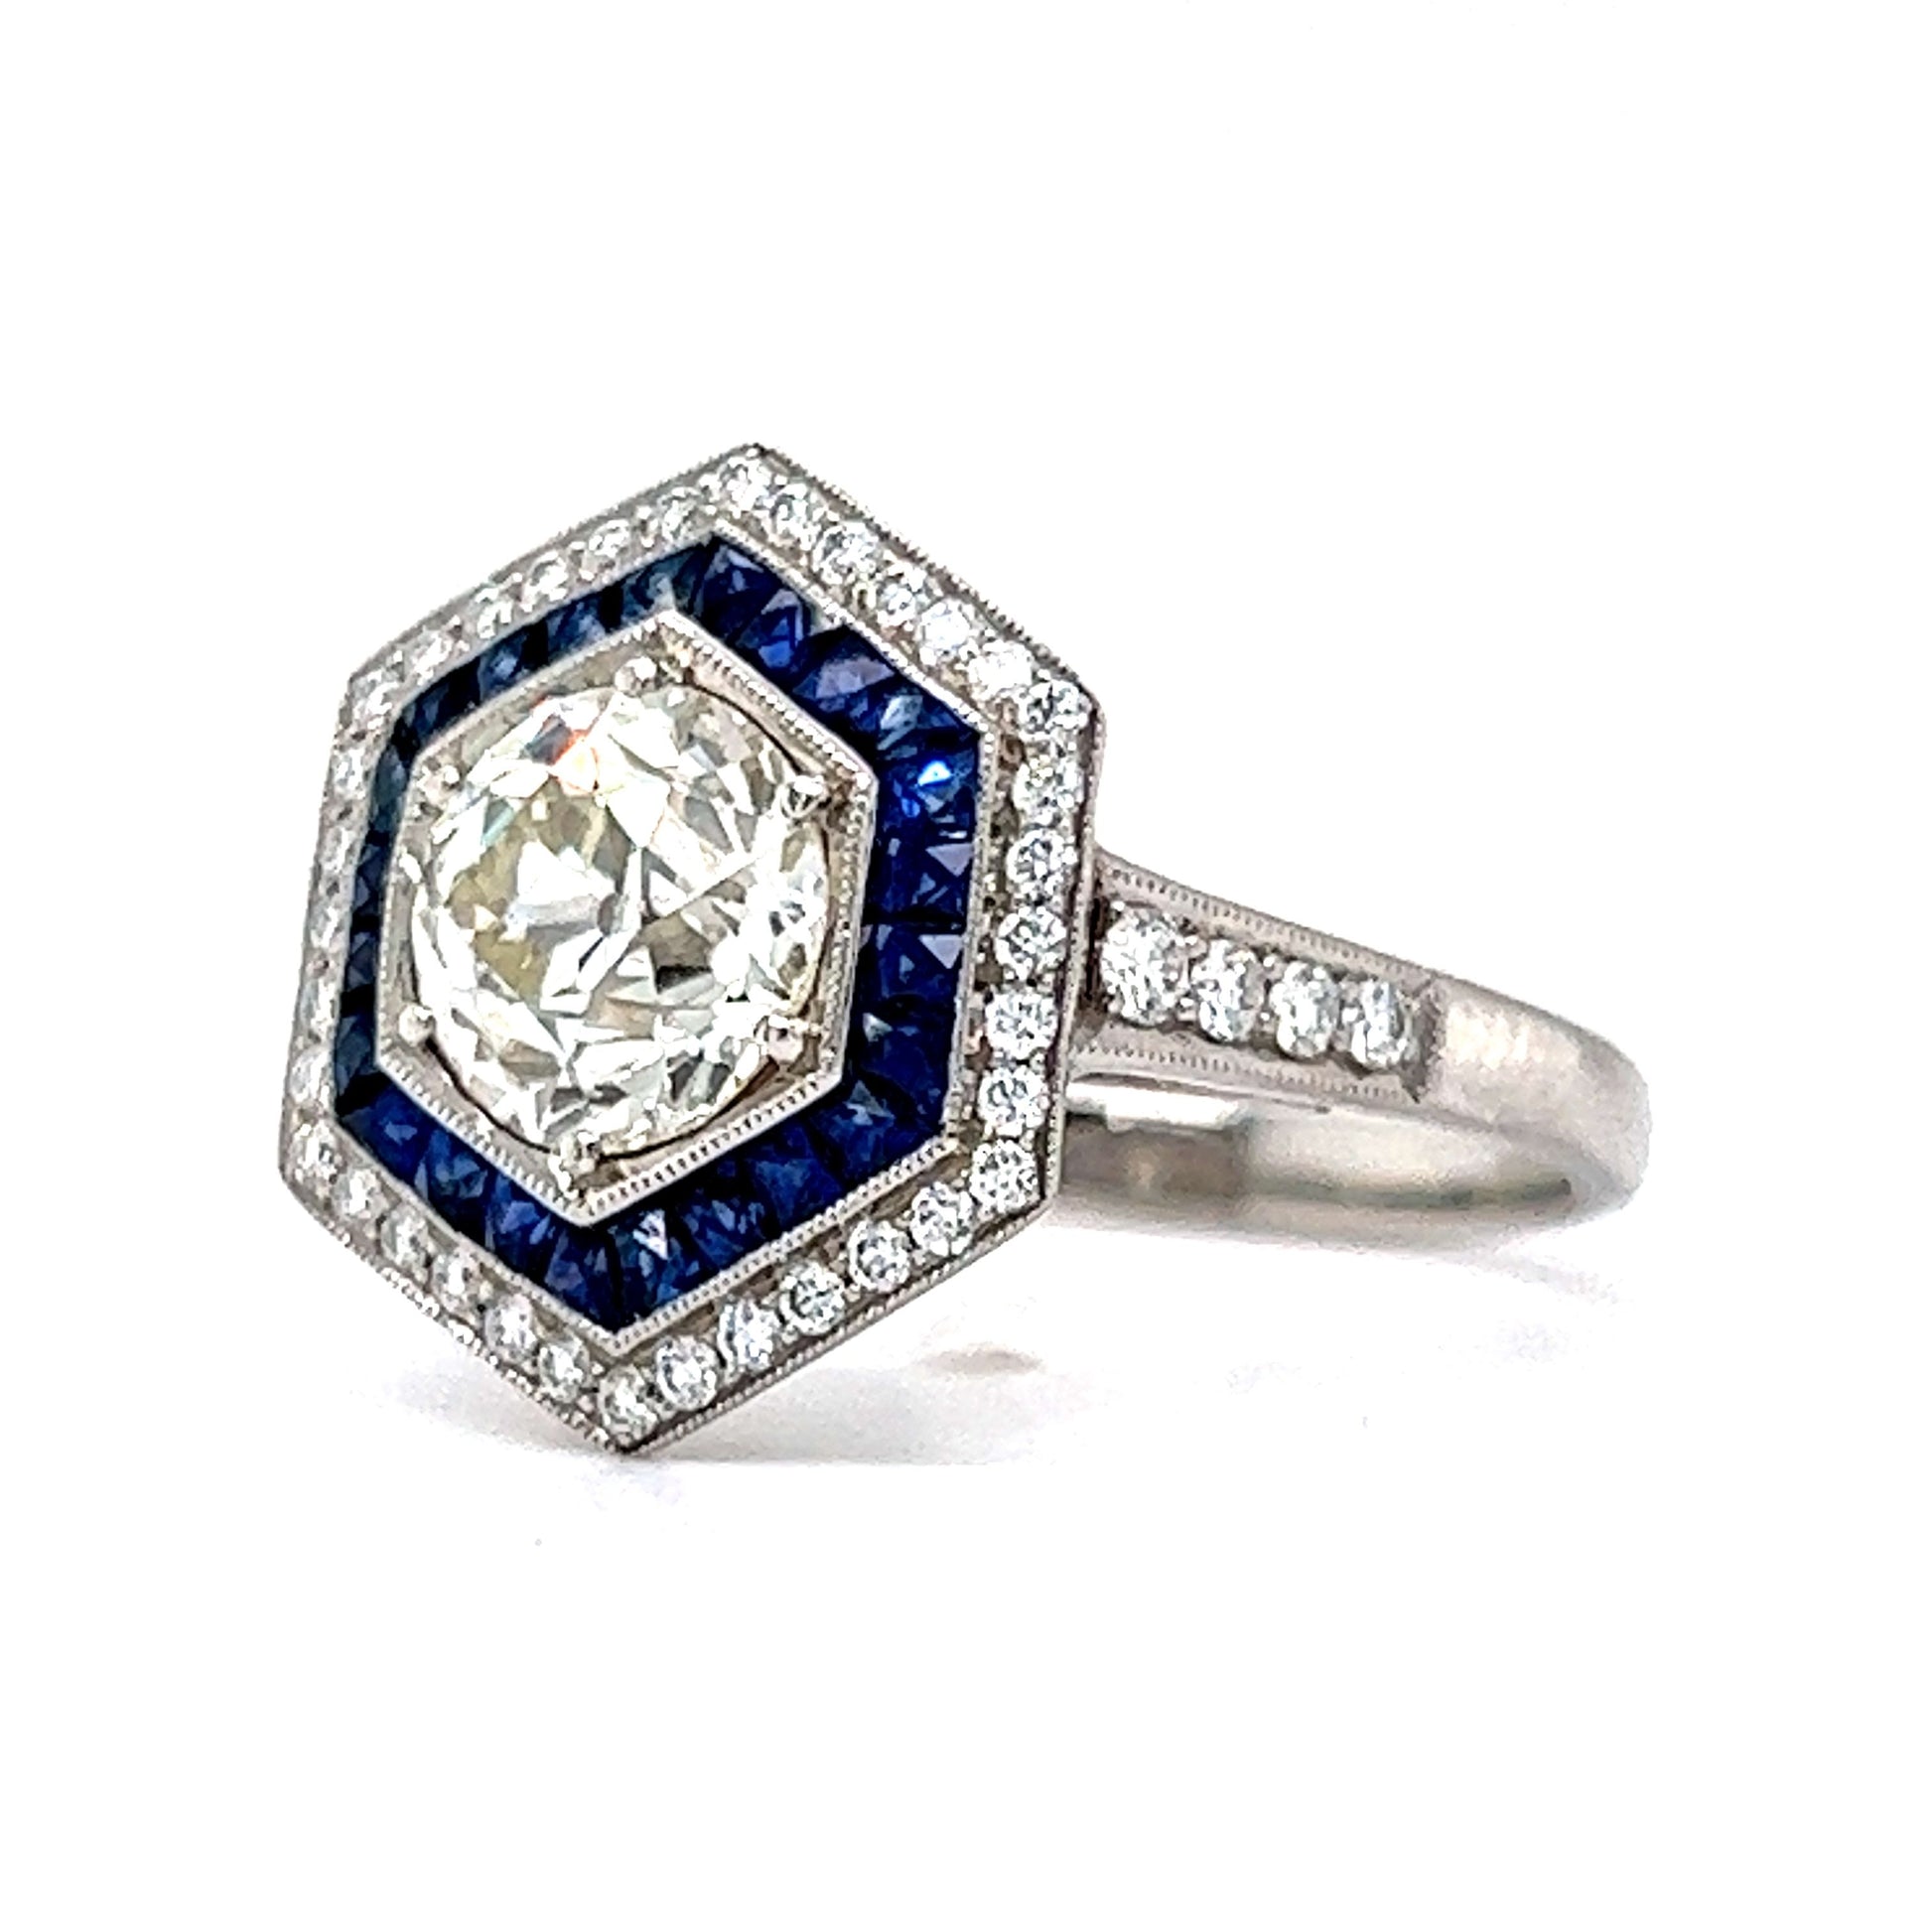 1.51 Hexagon Shaped Diamond & Sapphire Engagement Ring in PlatinumComposition: Platinum Ring Size: 6.5 Total Diamond Weight: 1.81ct Total Gram Weight: 6.3 g Inscription: Pt950 Sophia D.
      